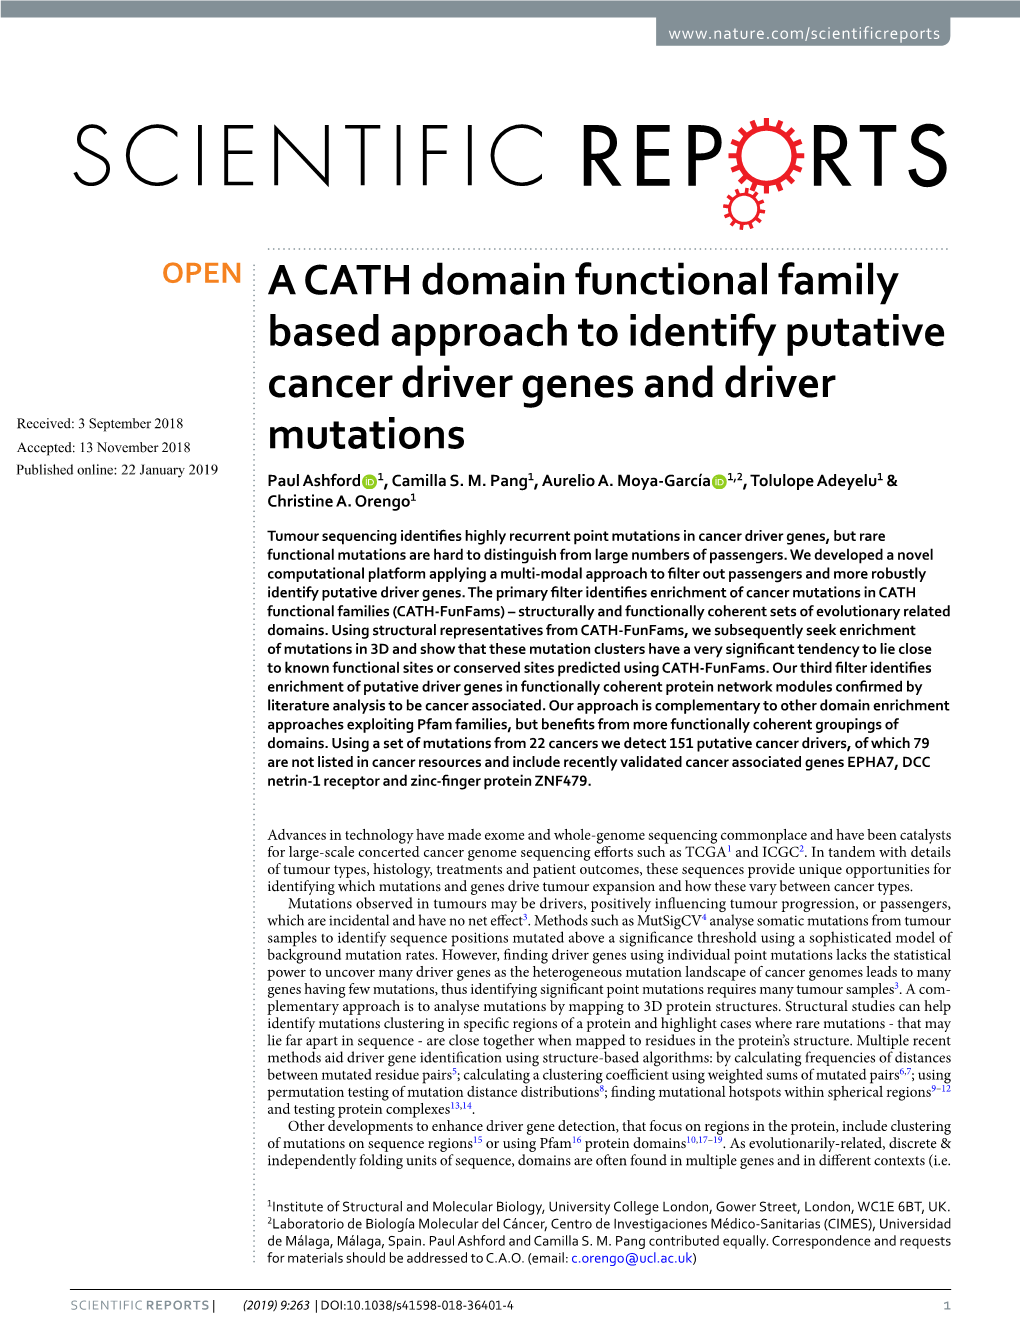 A CATH Domain Functional Family Based Approach To